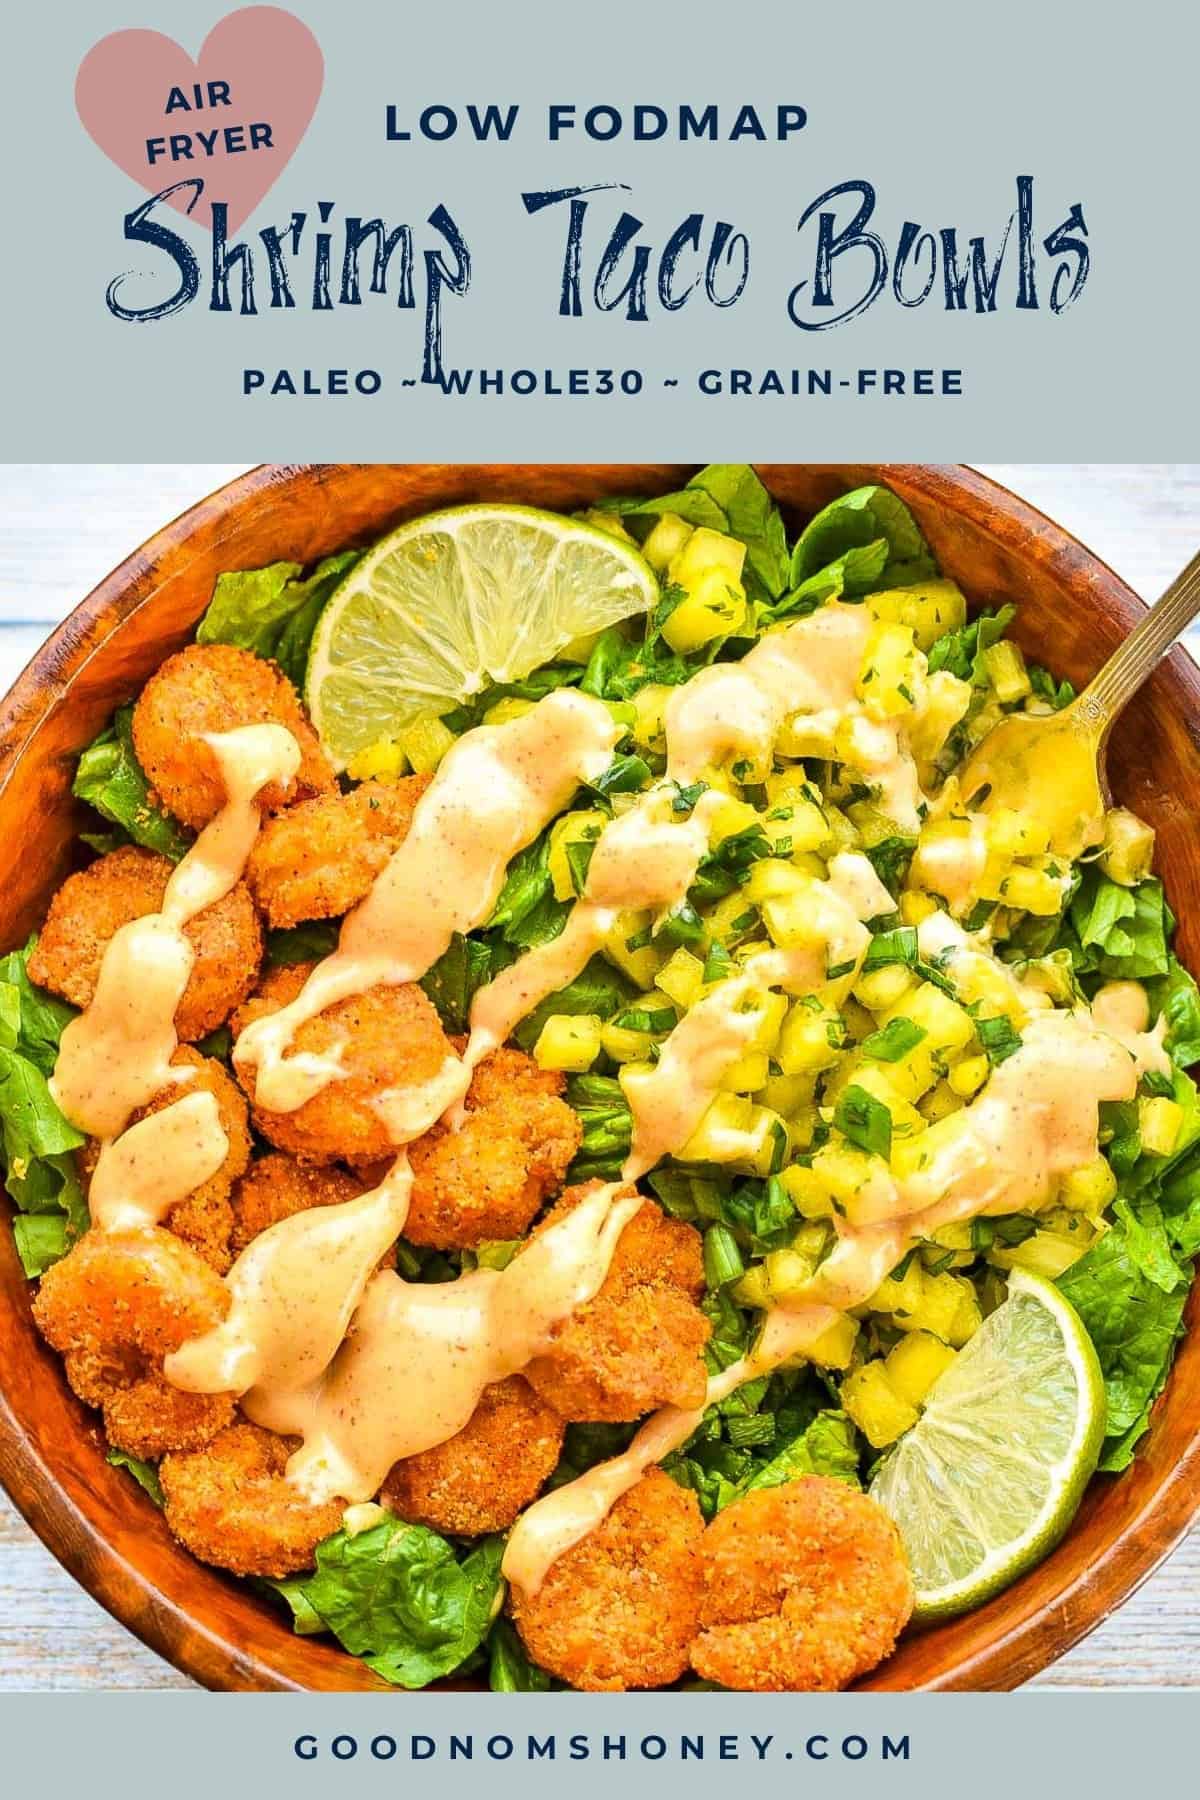 Pinterest image with low FODMAP air fryer shrimp taco bowl paleo whole30 grain-free at the top and goodnomshoney.com at the bottom